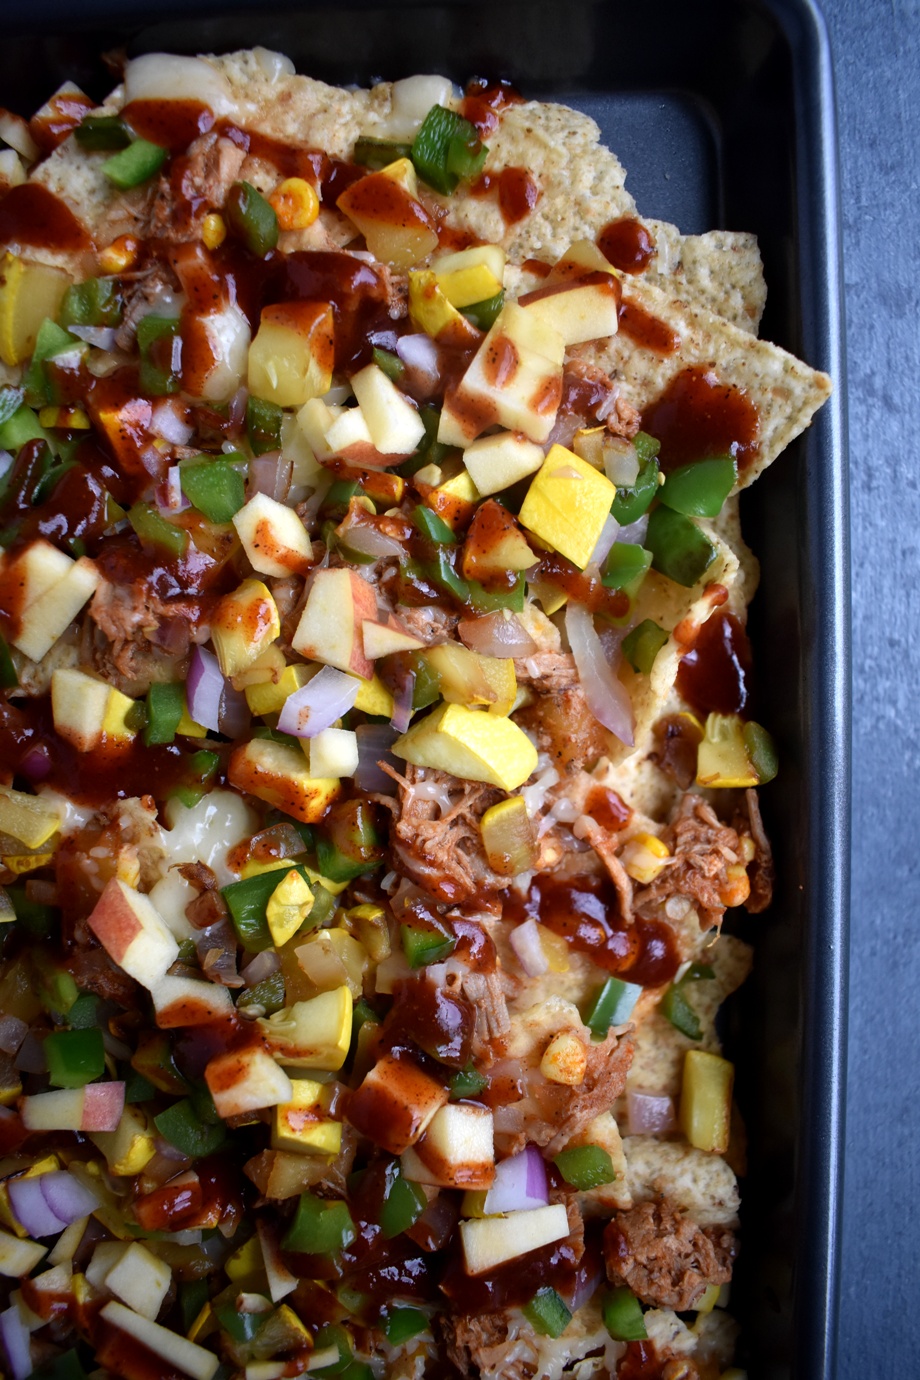 Loaded BBQ Pulled Pork Nachos are loaded with shredded pork, melted cheese, sauteed corn, bell peppers and onions and crunchy apples with a homemade drizzled smoky barbecue sauce! www.nutritionistreviews.com